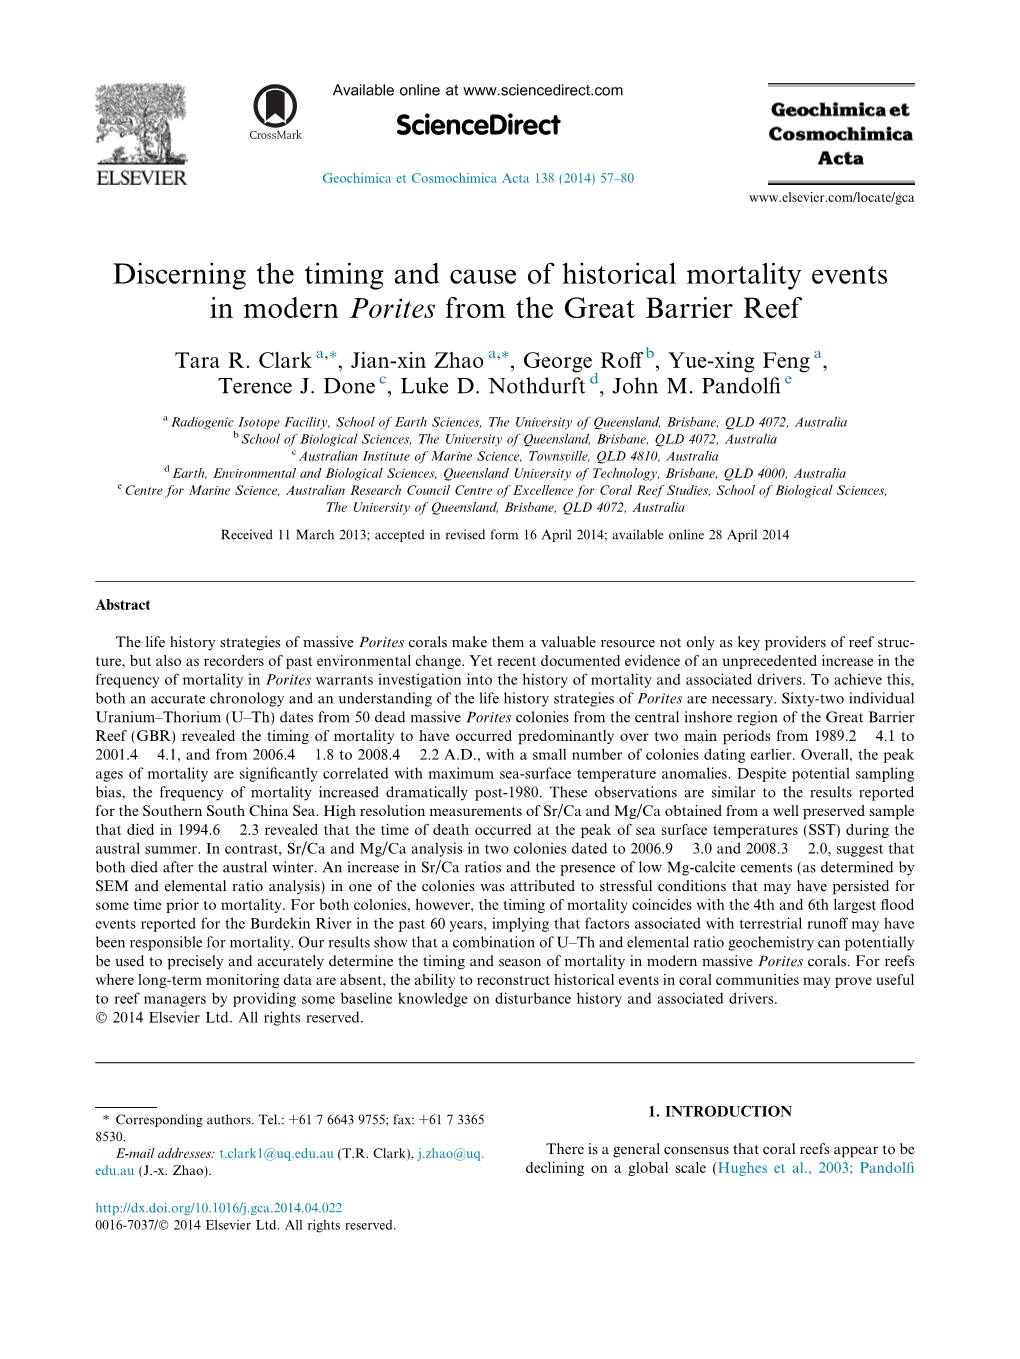 Discerning the Timing and Cause of Historical Mortality Events in Modern Porites from the Great Barrier Reef